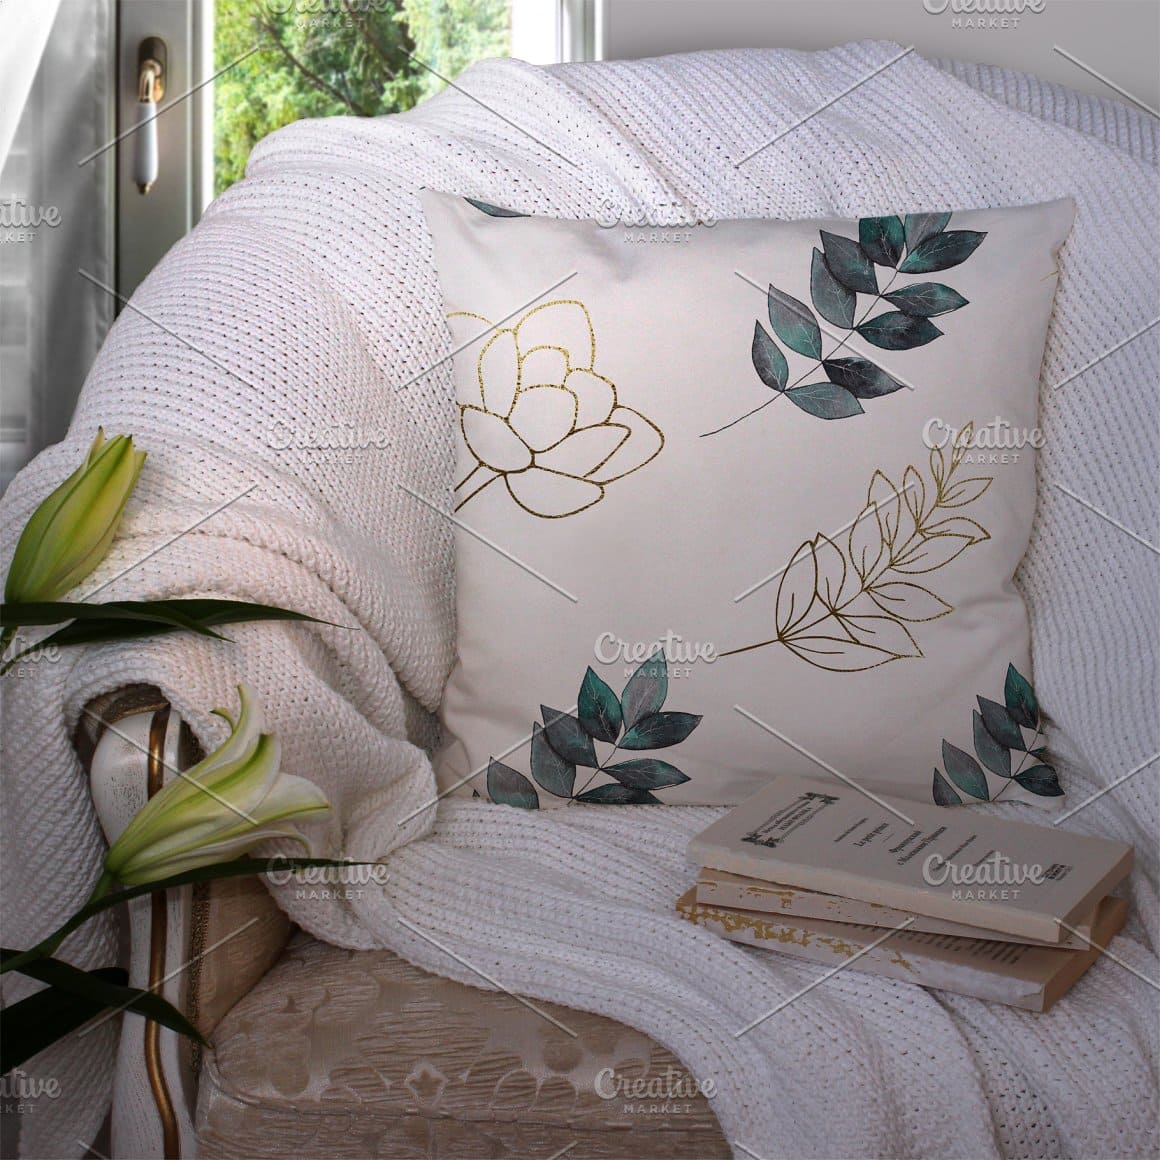 Decorative pillow with a contour design of flowers and plants.